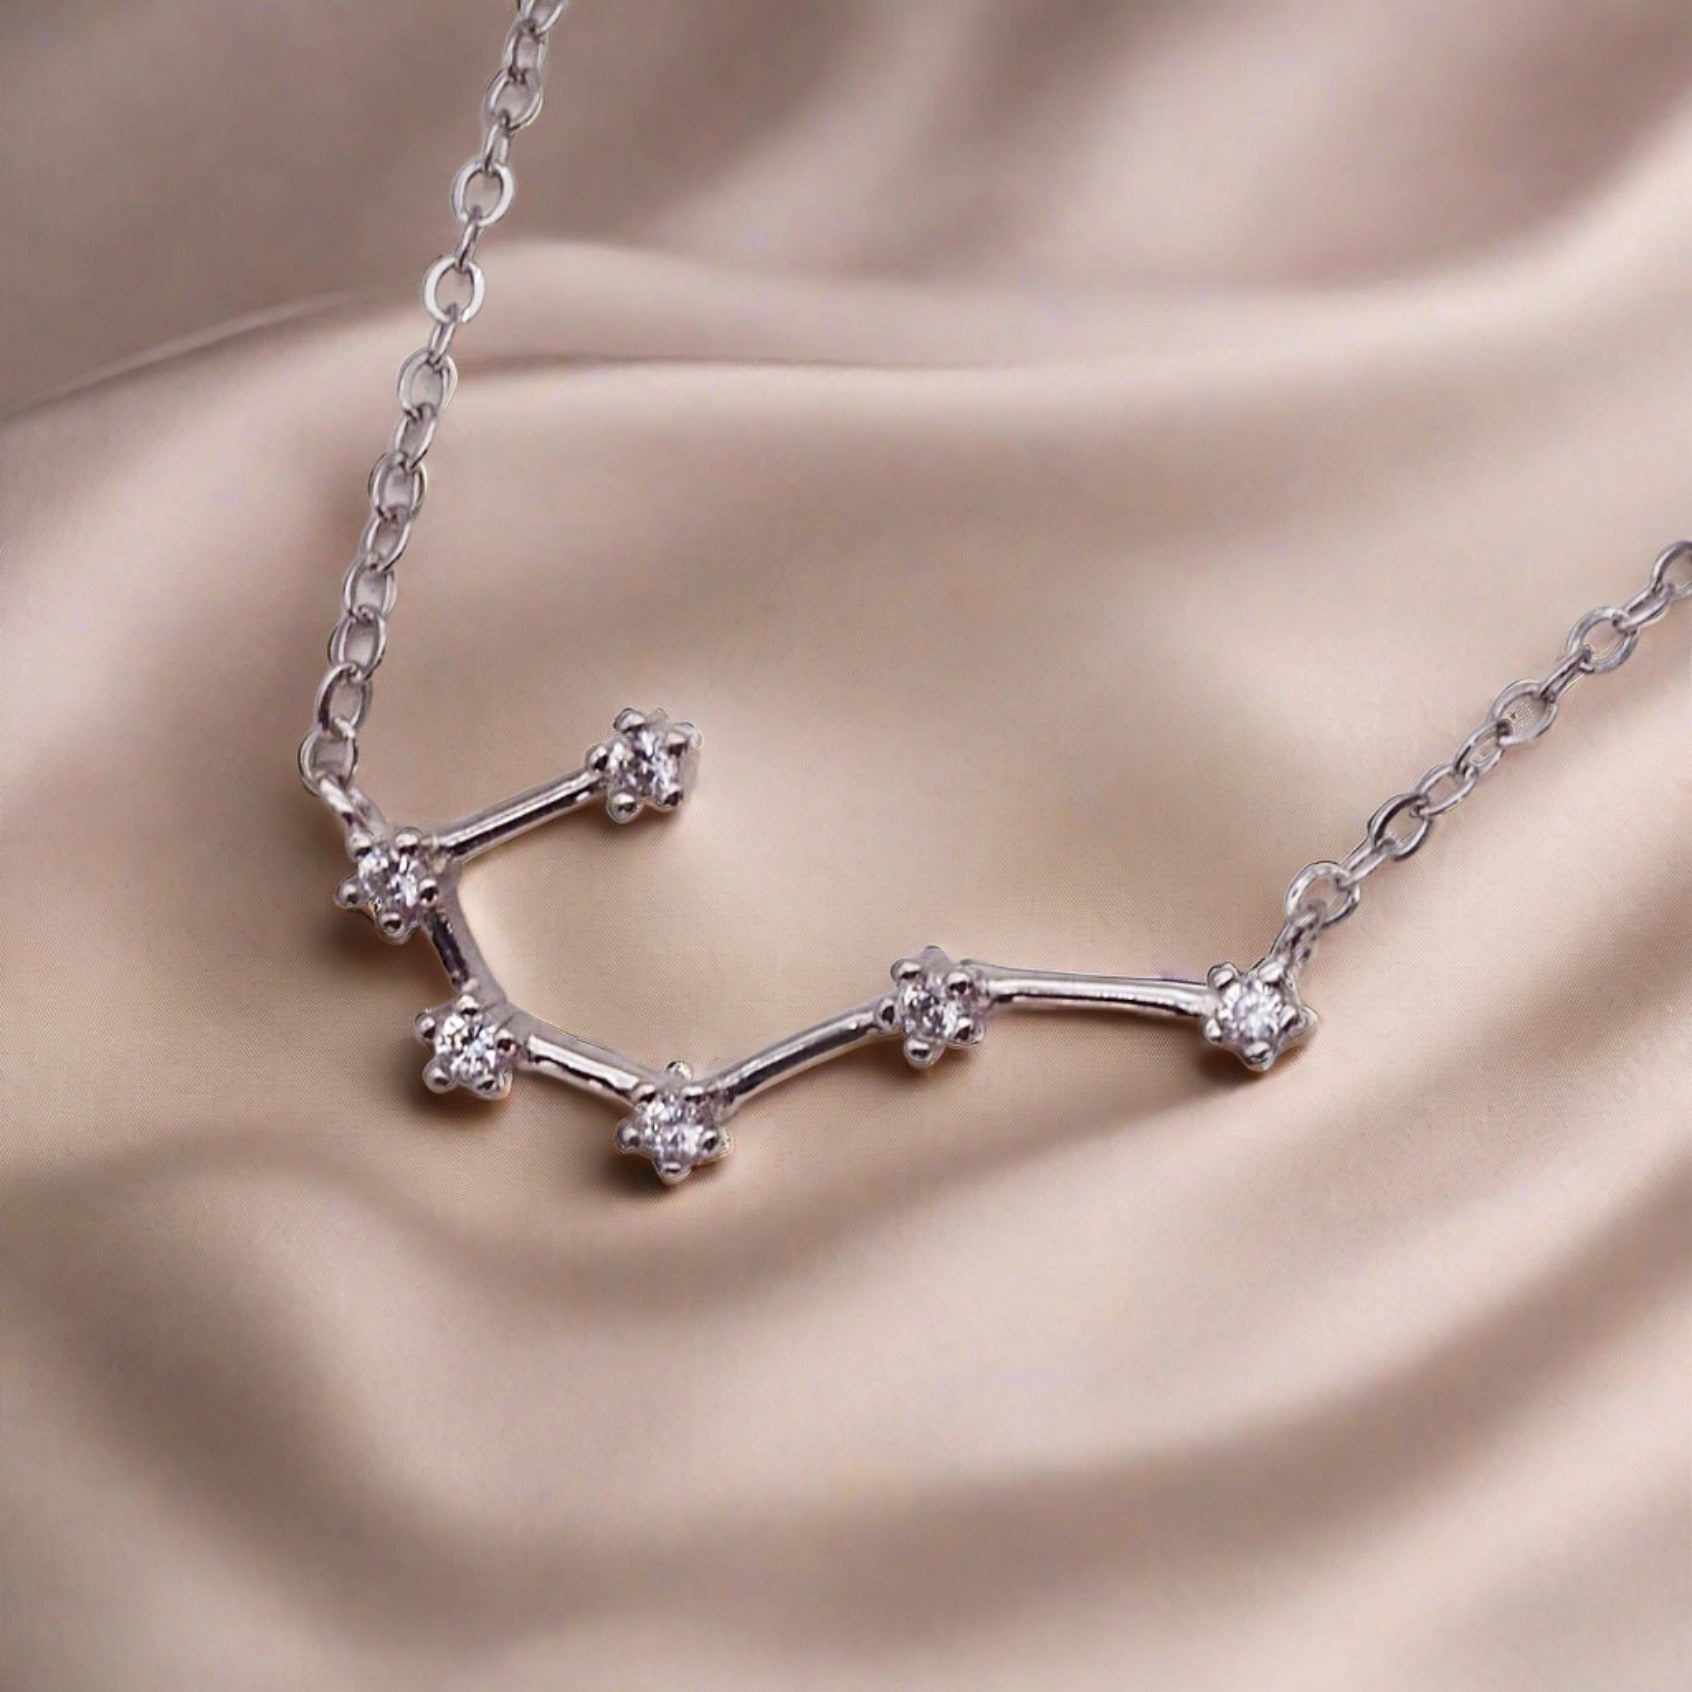 Cancer Constellation Necklace - womens jewellery by indie and harper